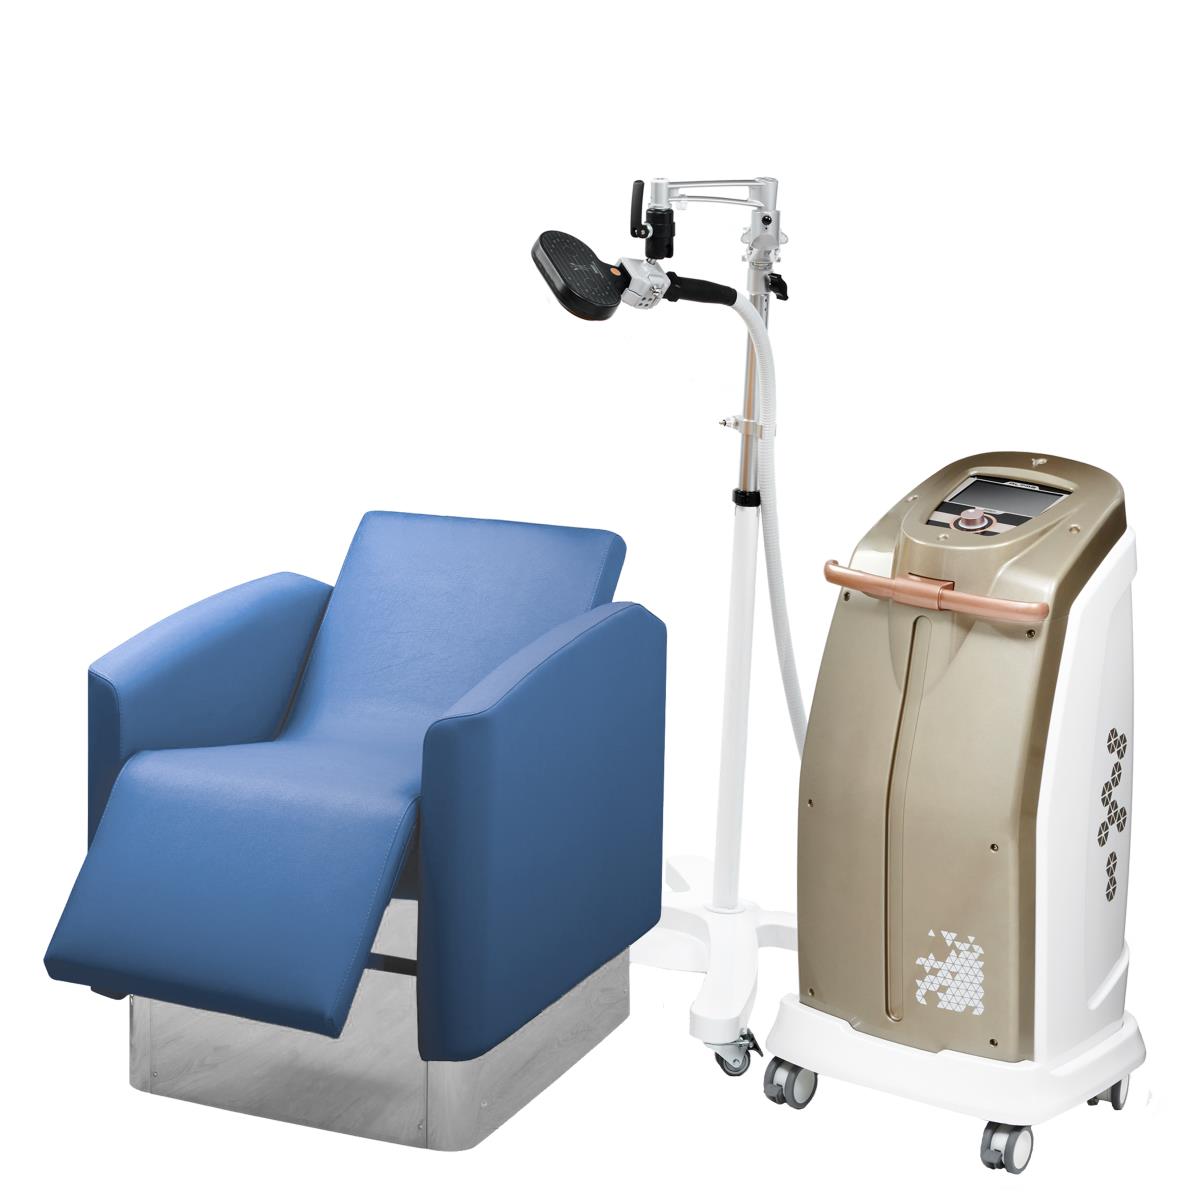 TMS DEVICES – Sebers Medical